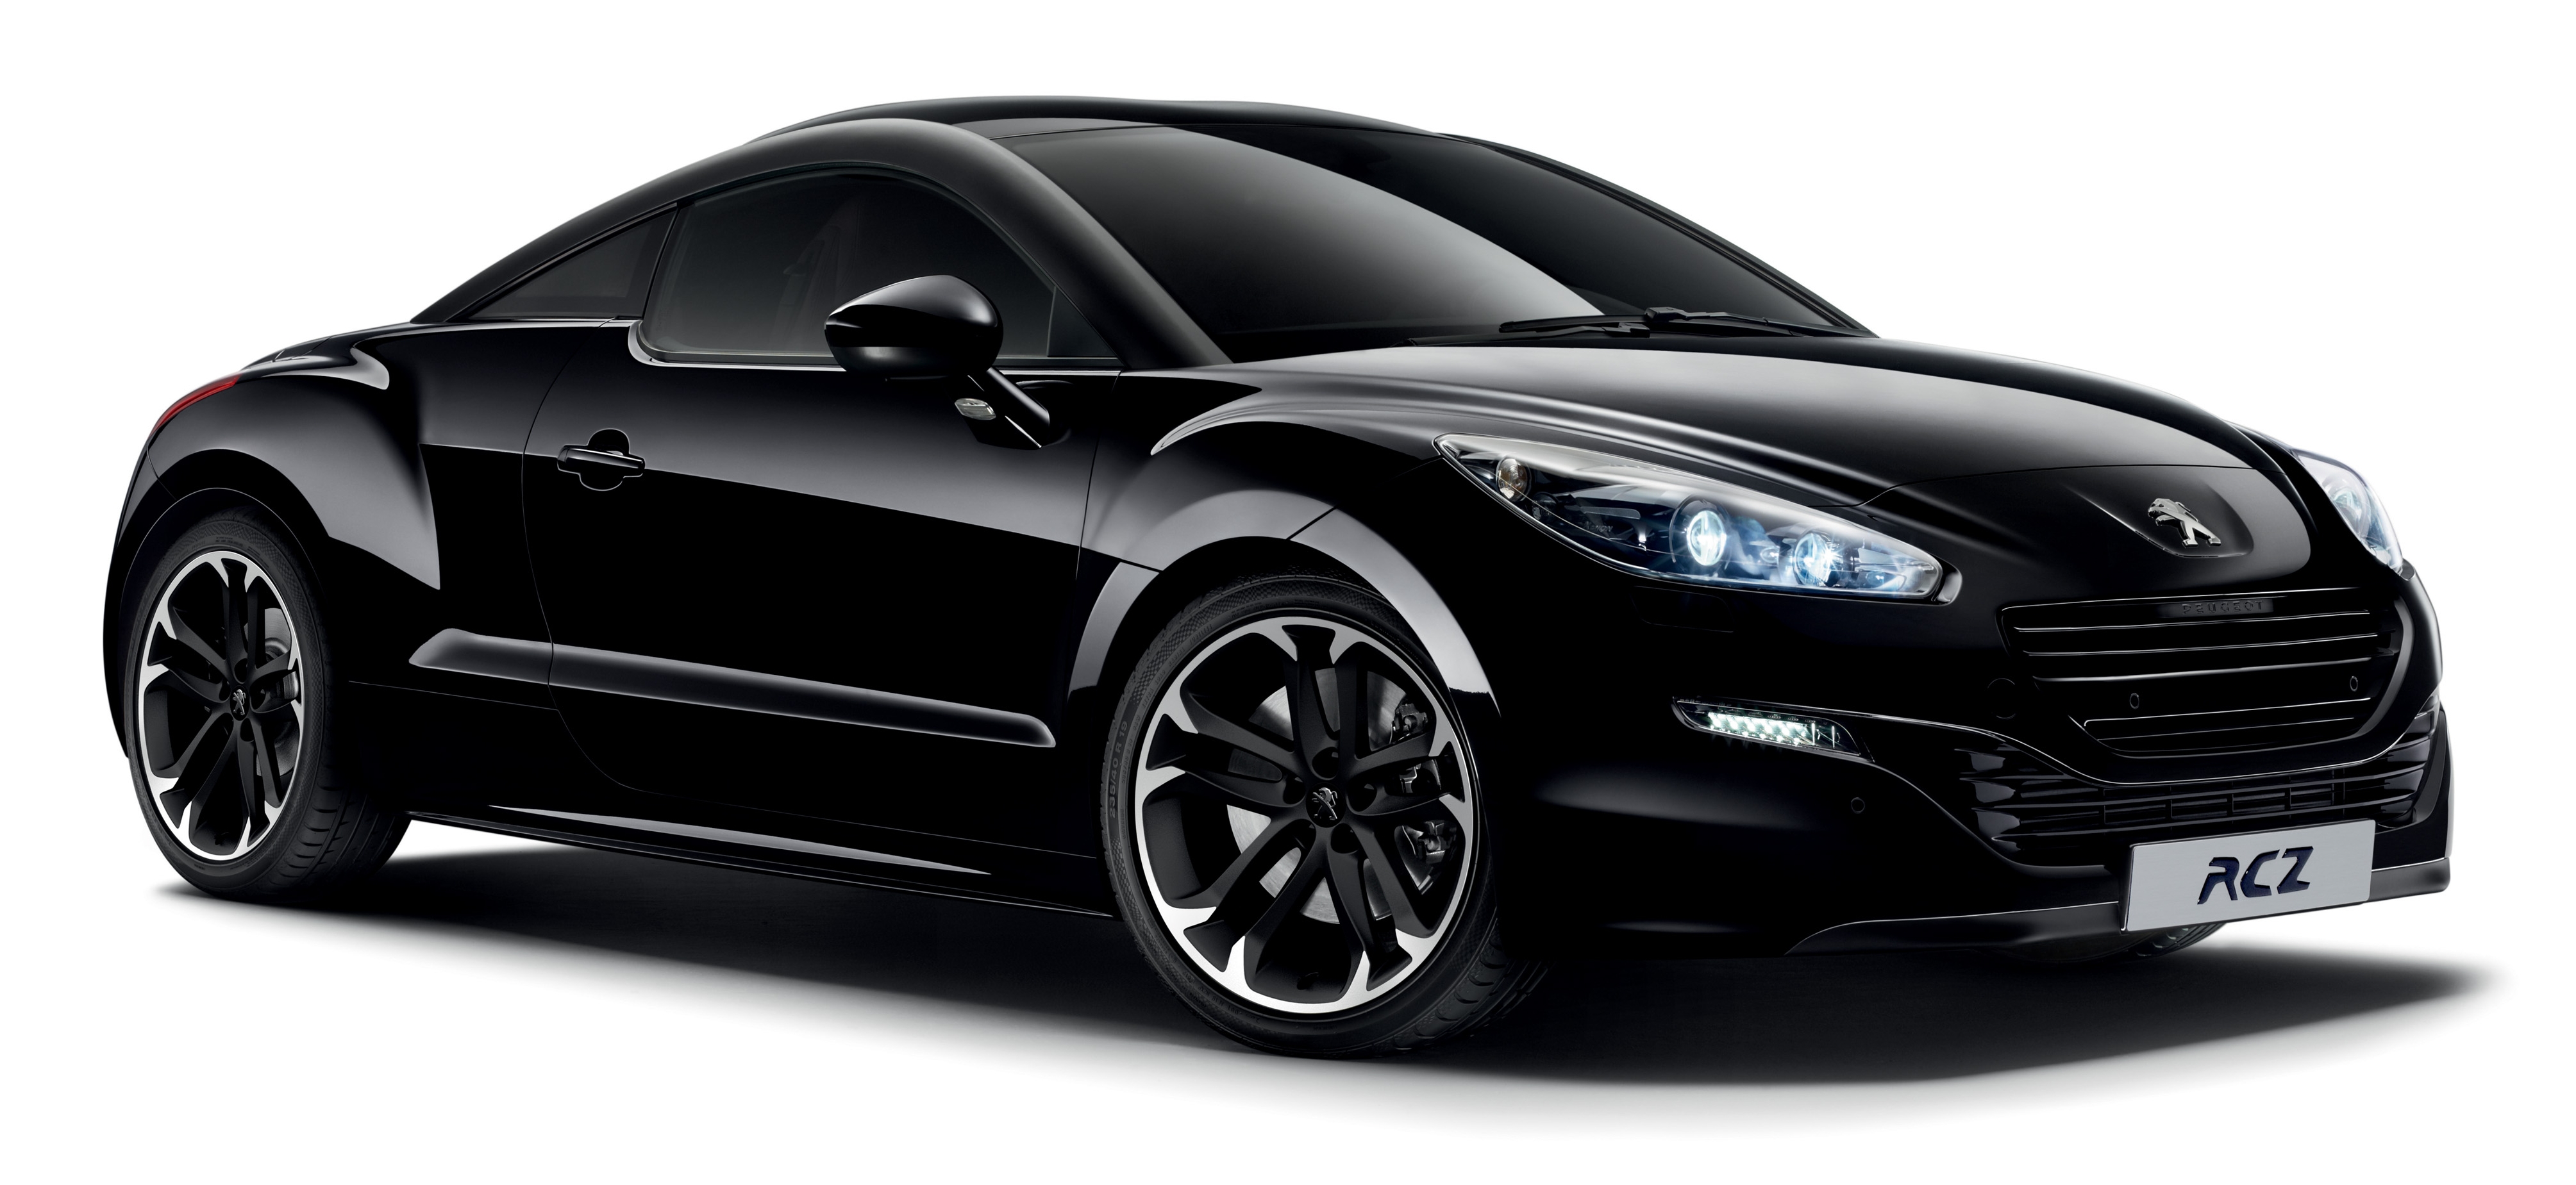 Peugeot RCZ Red Carbon Limited Edition only 300